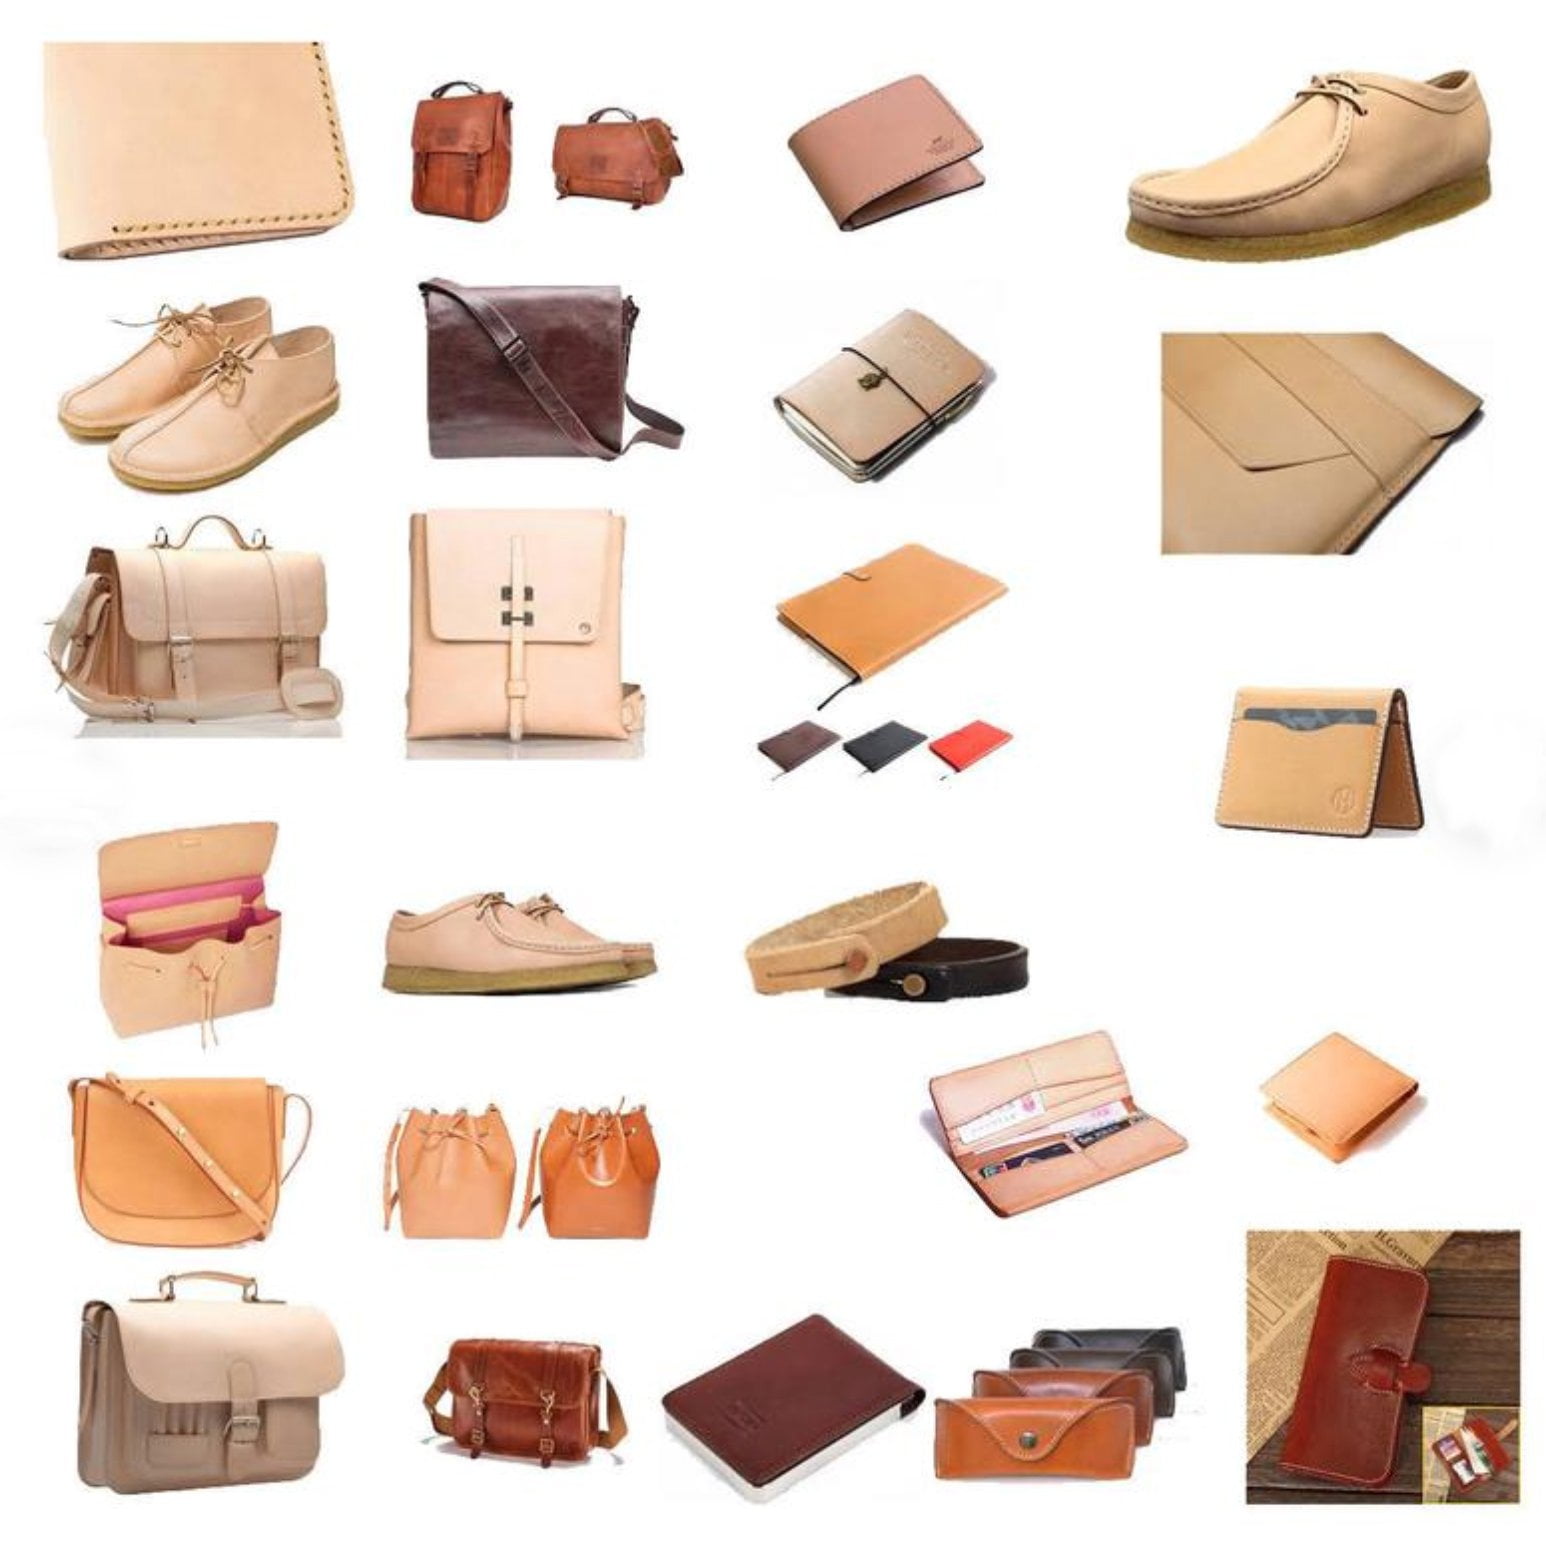 ELW 100% Veg Tan Full Grain Leather Cowhide Pre-Cut Pieces 3/4 oz. 1.2-1.6  mm - Import AA Grade Tooling Leather Hide - Vegetable Tanned Leather for